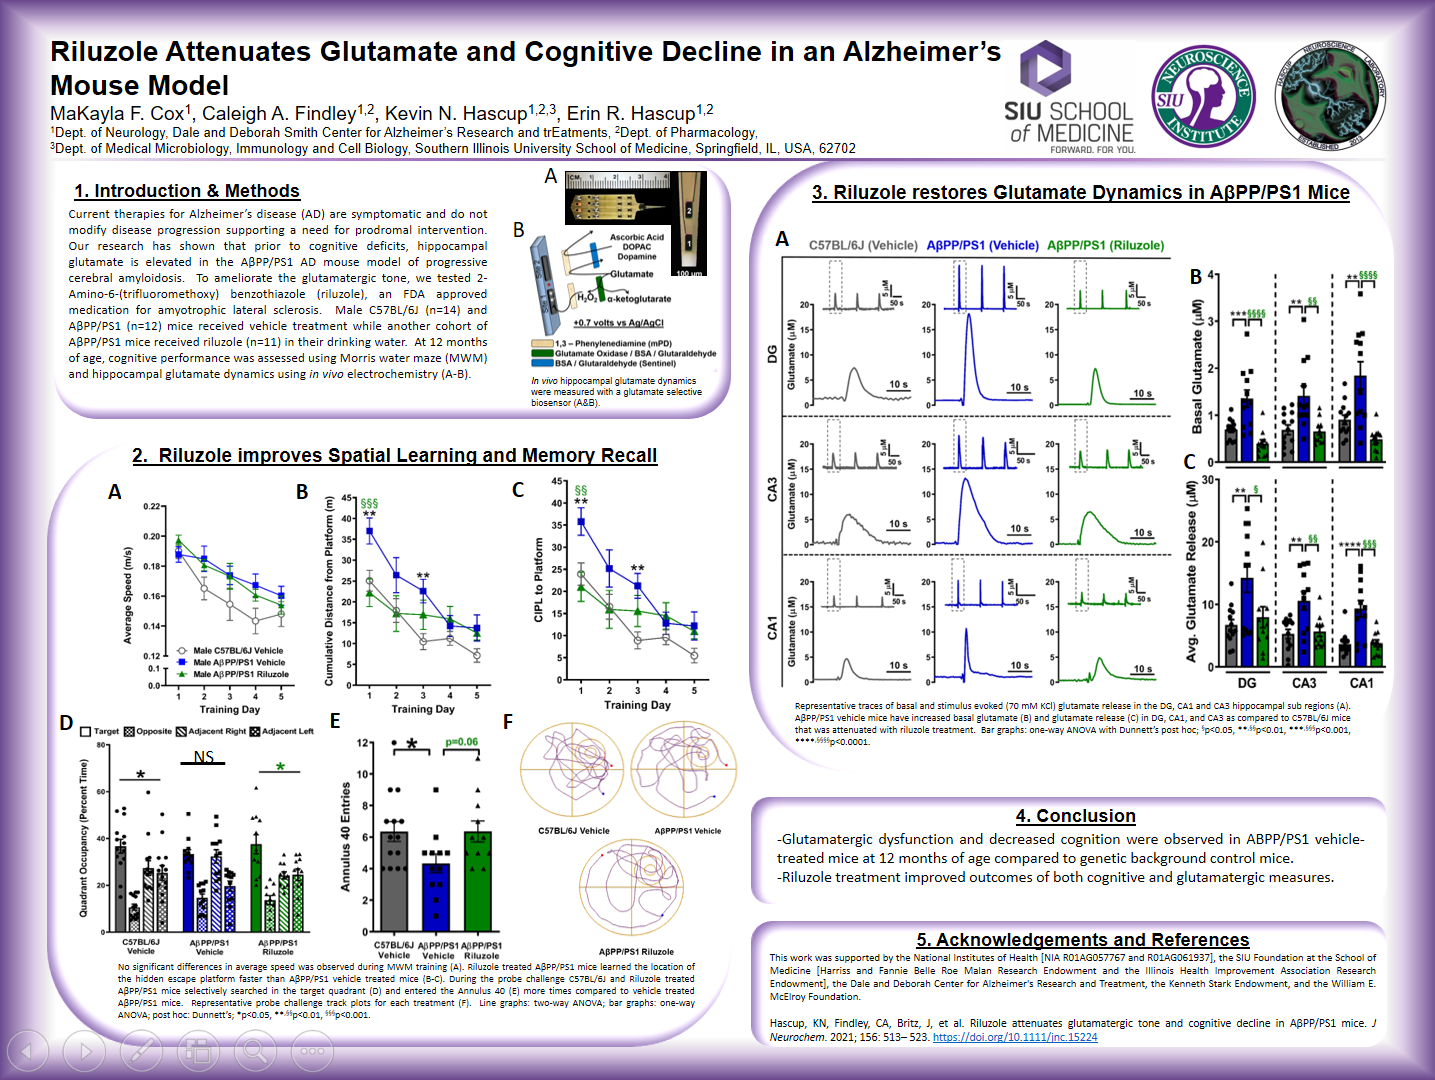 Showcase Image for Riluzole attenuates Glutamate and Cognitive Decline in an Alzheimers Mouse Model